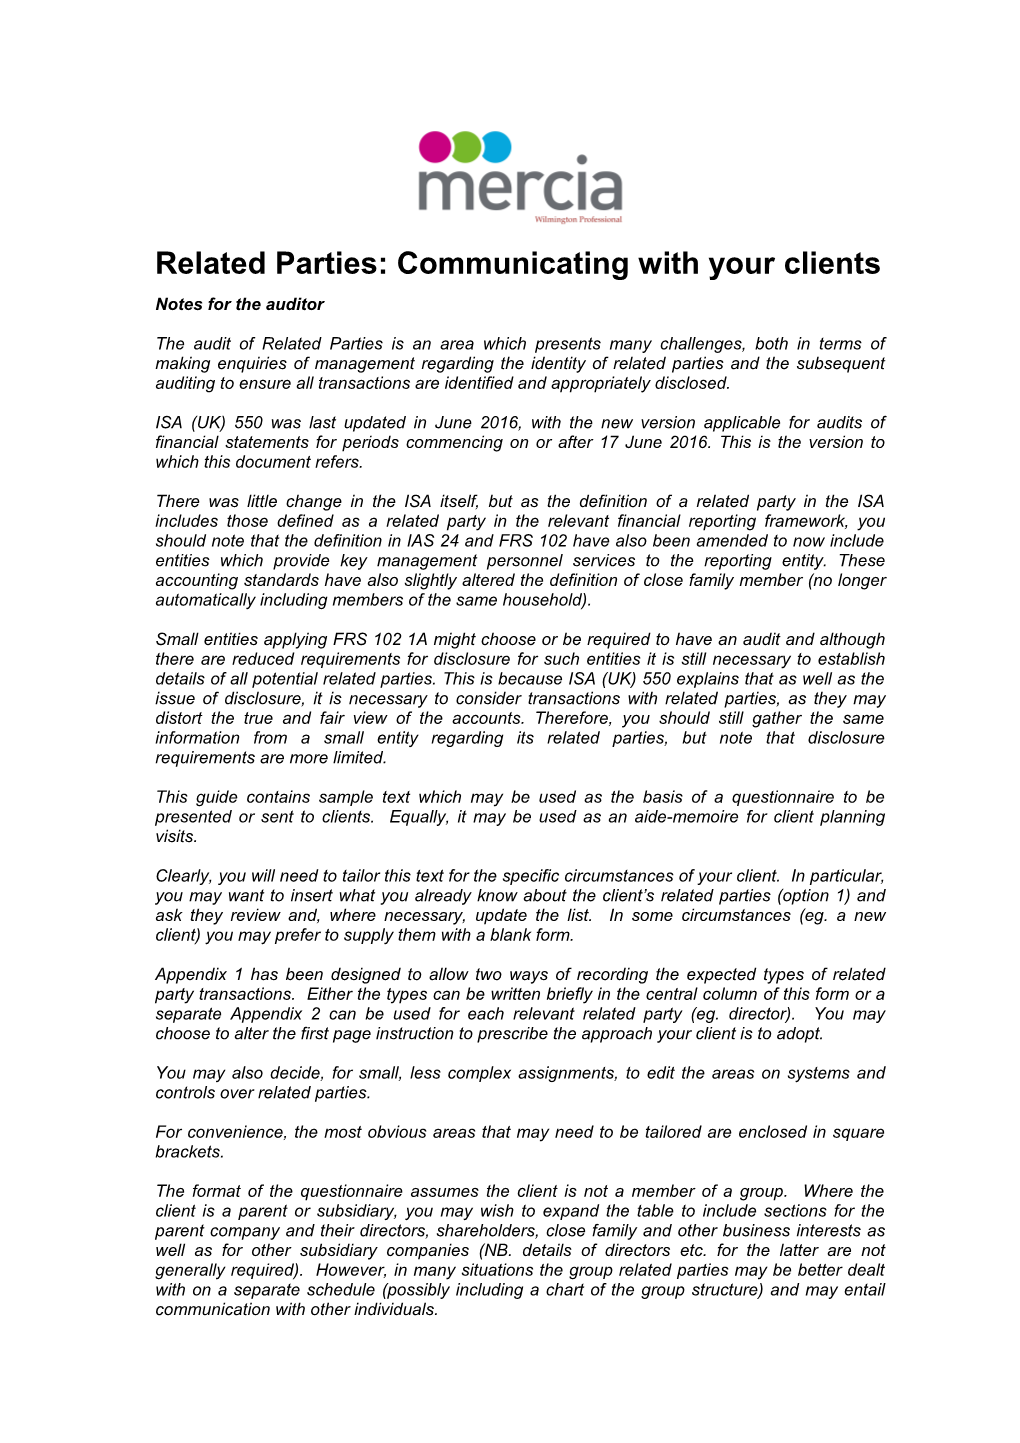 Auditing Related Party Transactions: Communicating with Your Clients